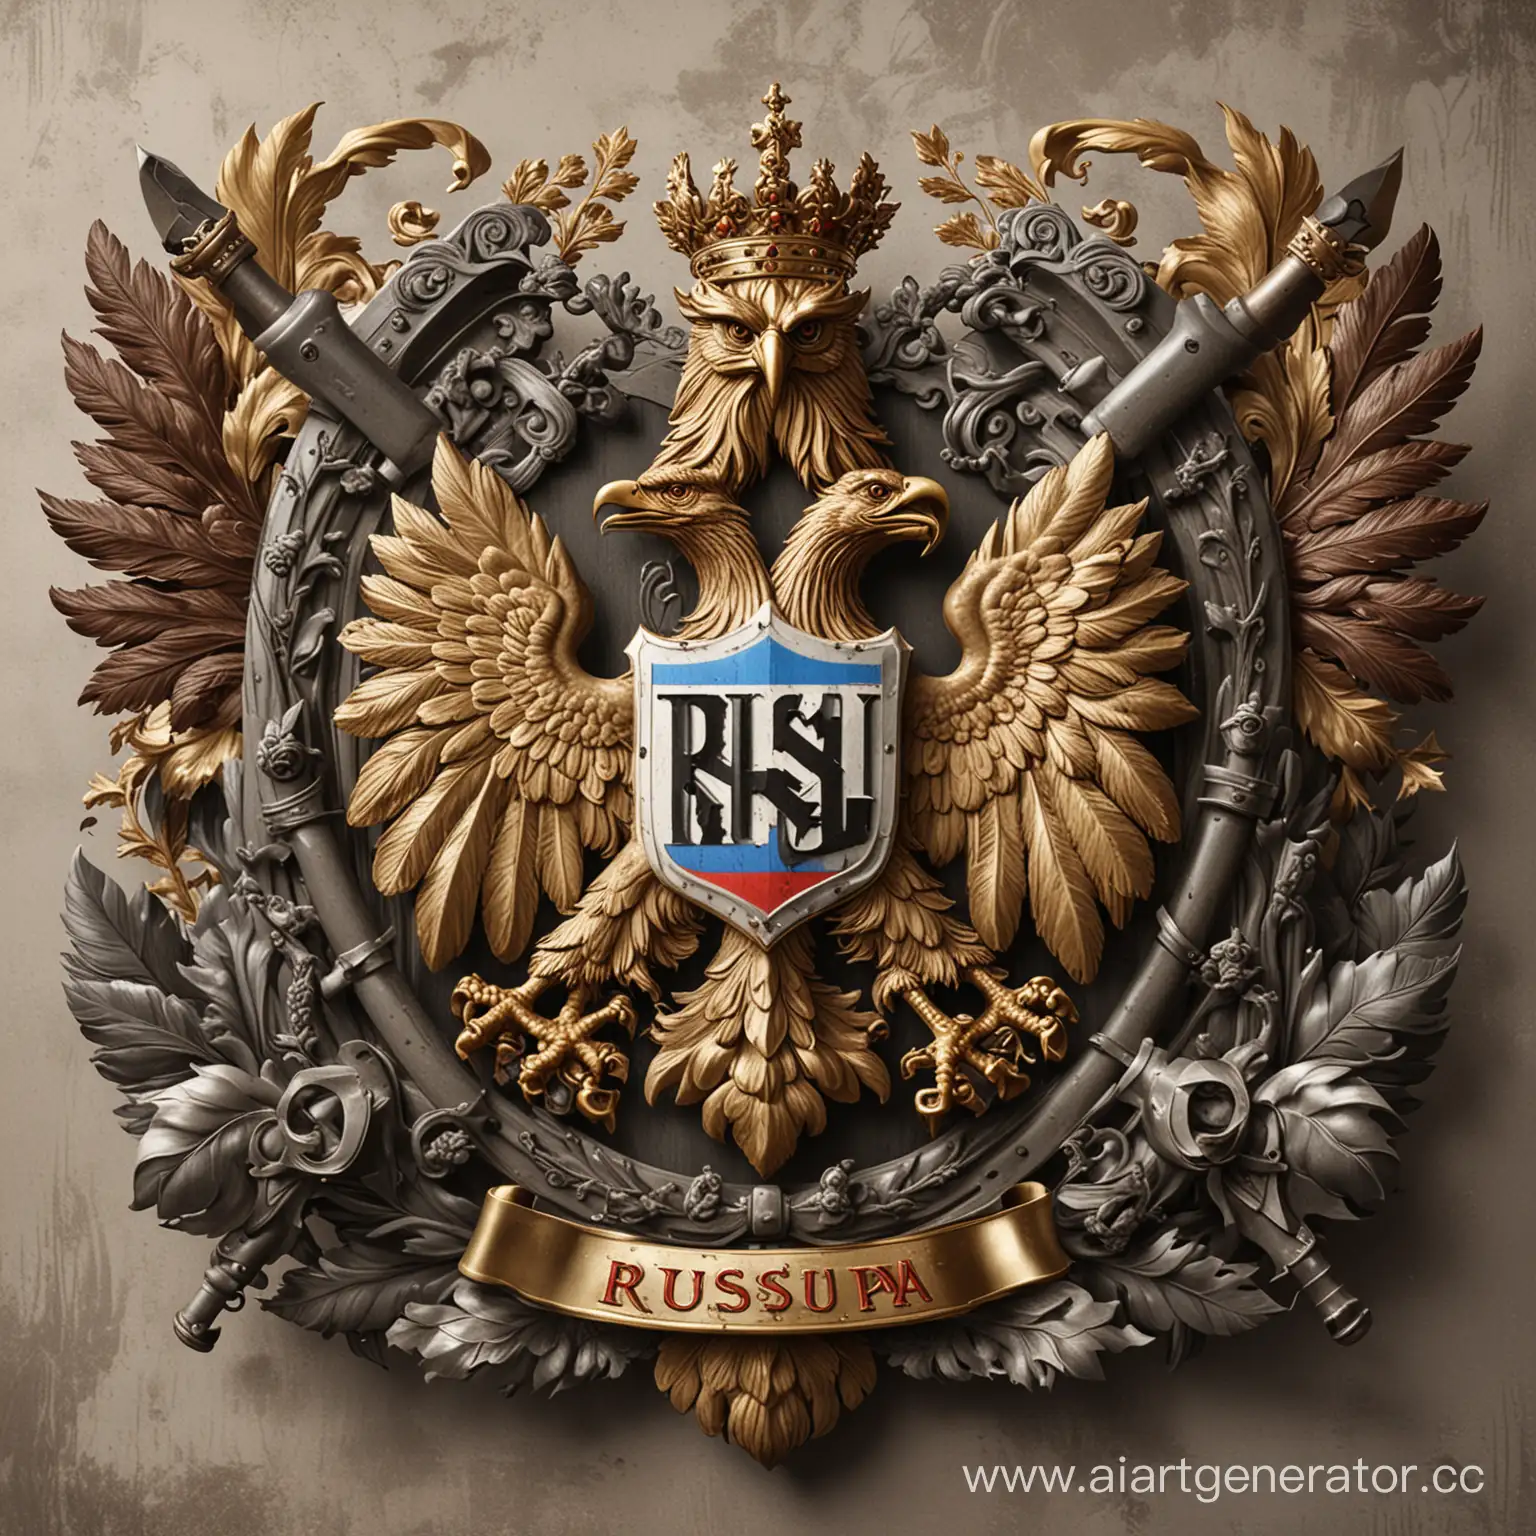 Russian-Coat-of-Arms-with-Fascist-Symbolism-Holding-DoubleBarreled-Shotgun-and-Bunch